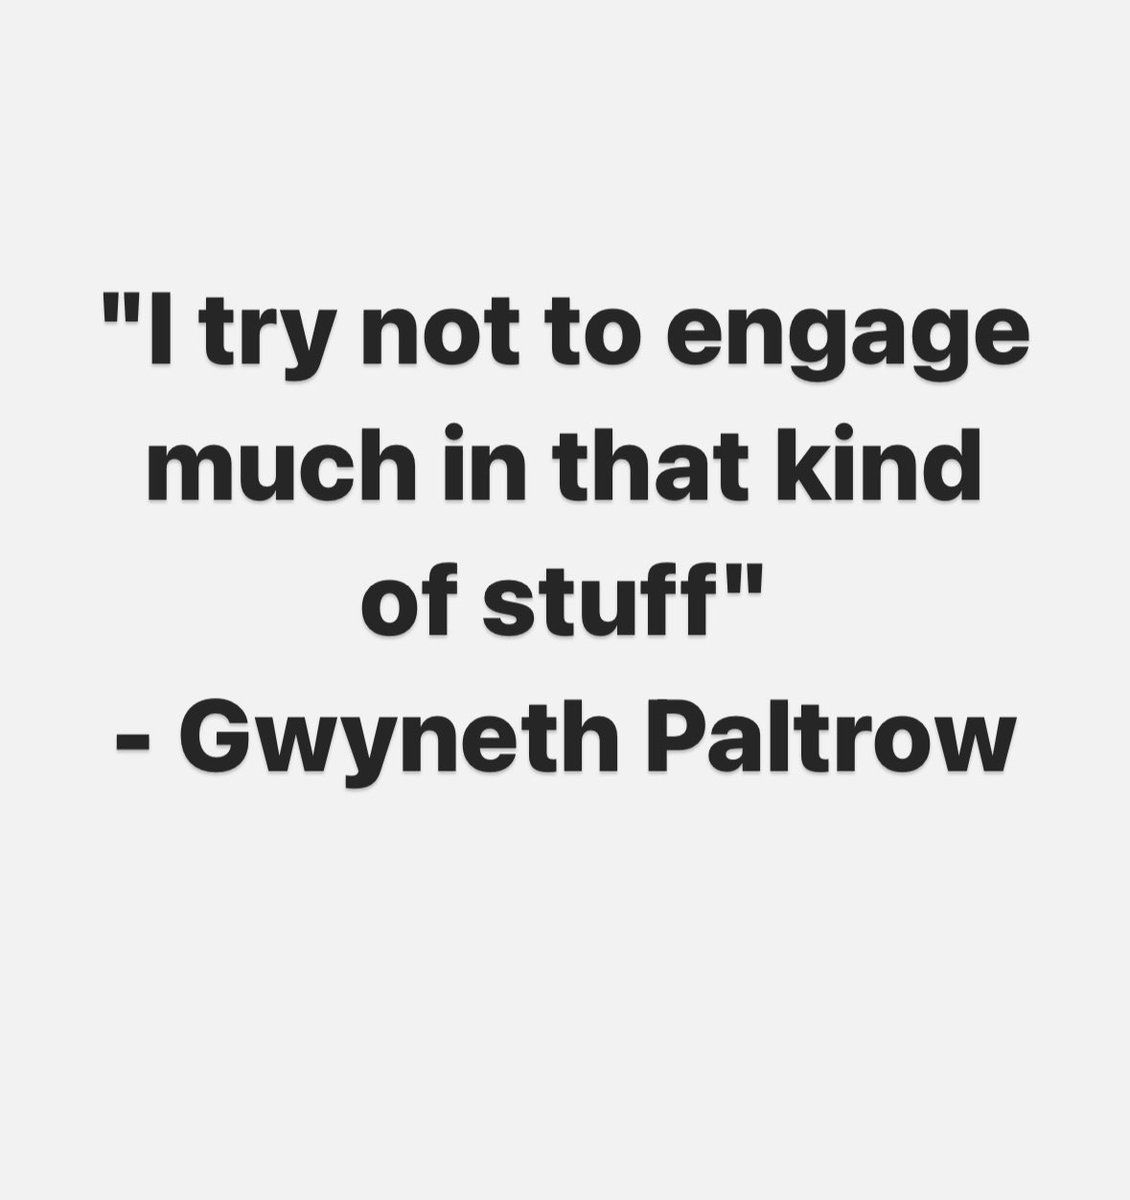 ⛷GWYNETH KNOWS ABOUT OUR SHOW⛷ When profiled for @cultured_mag by the brilliant @EmiliaPetrarca Gwyneth Paltrow was asked about #GwynethGoesSkiing! 'I try not to engage much in that kind of stuff' - iconic words from an iconic woman.